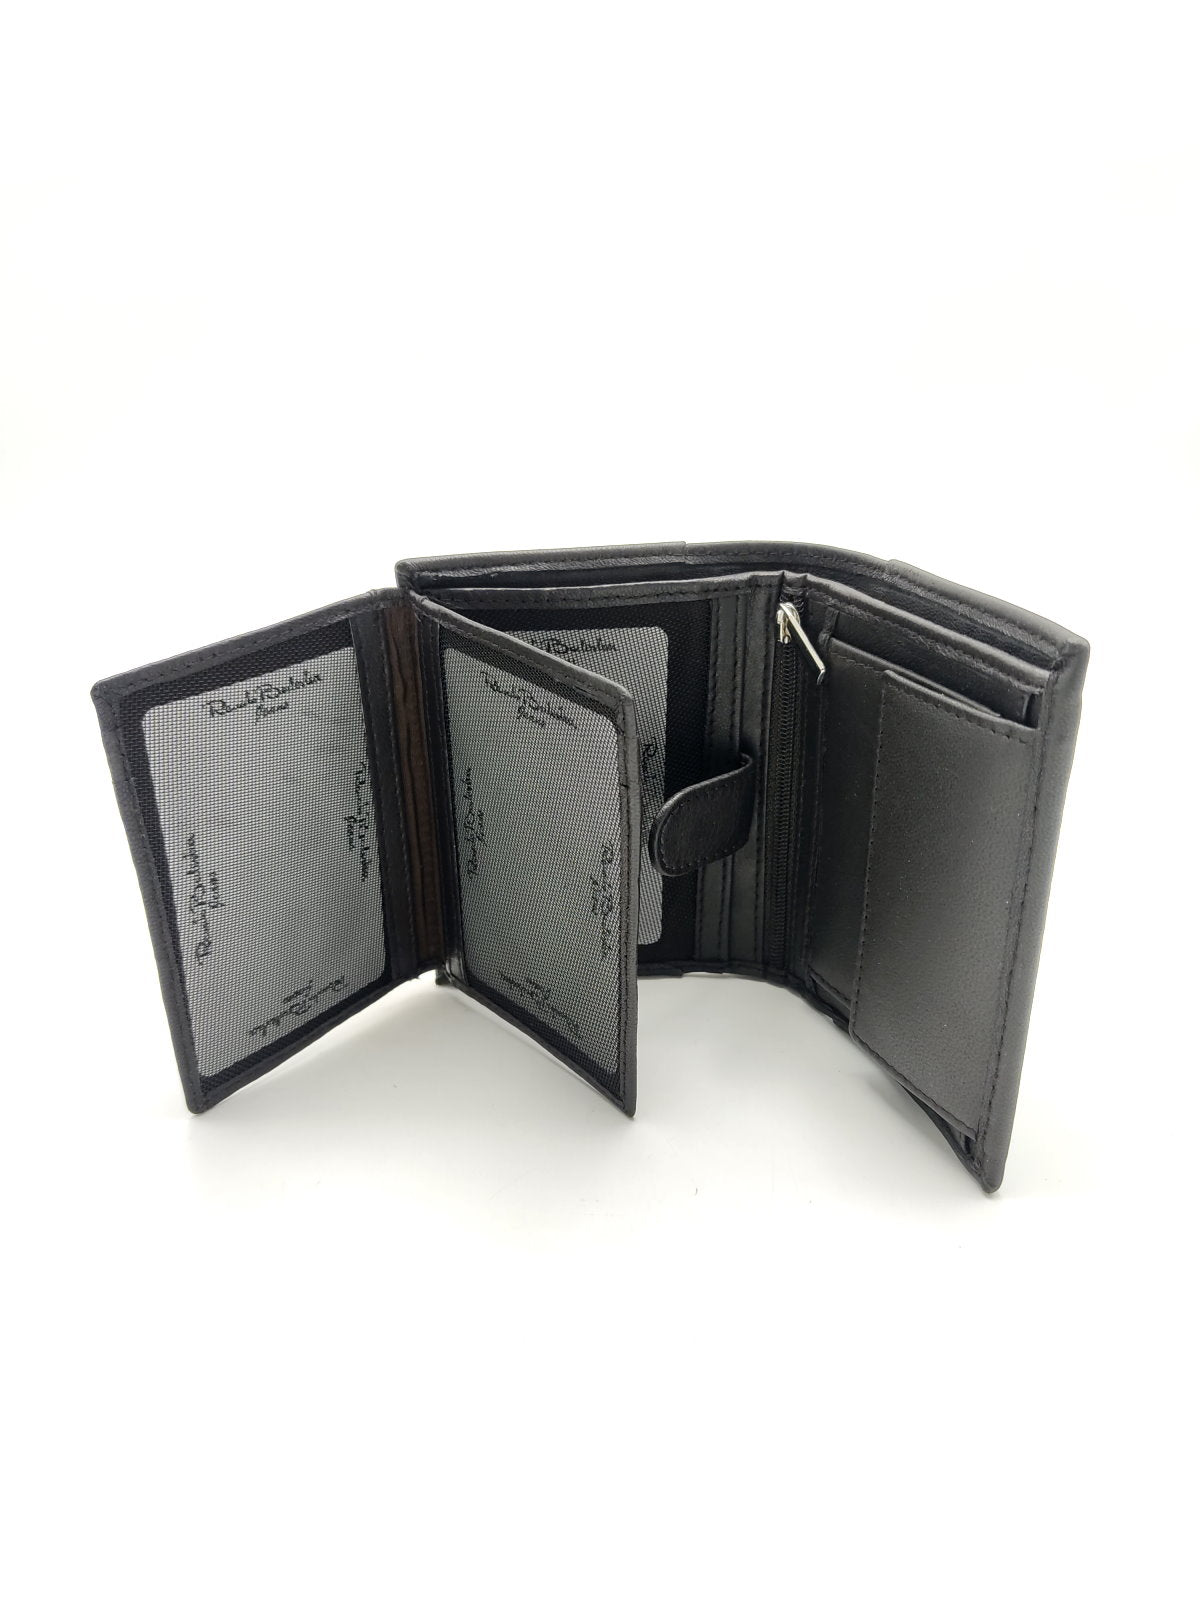 Genuine leather wallet for Men, Brand Renato Balestra Jeans, with wooden box, art. PDK163-65.425